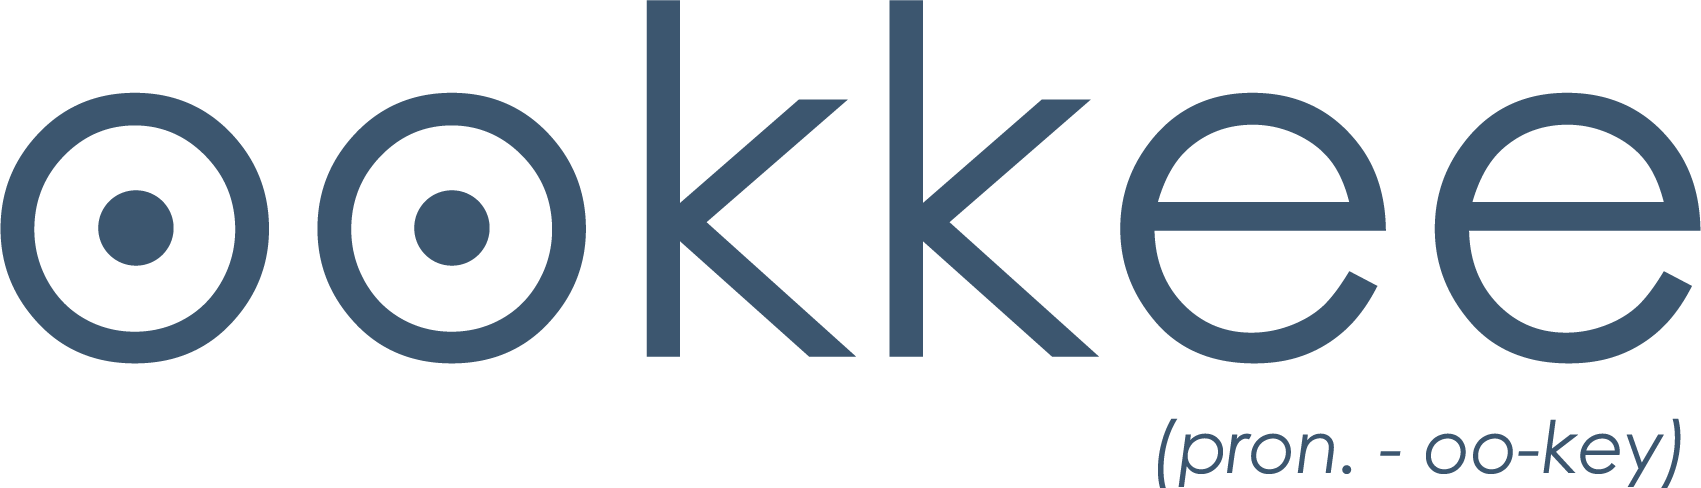 Ookkee - Outsourced Bookkeeping with Insights and Clarity